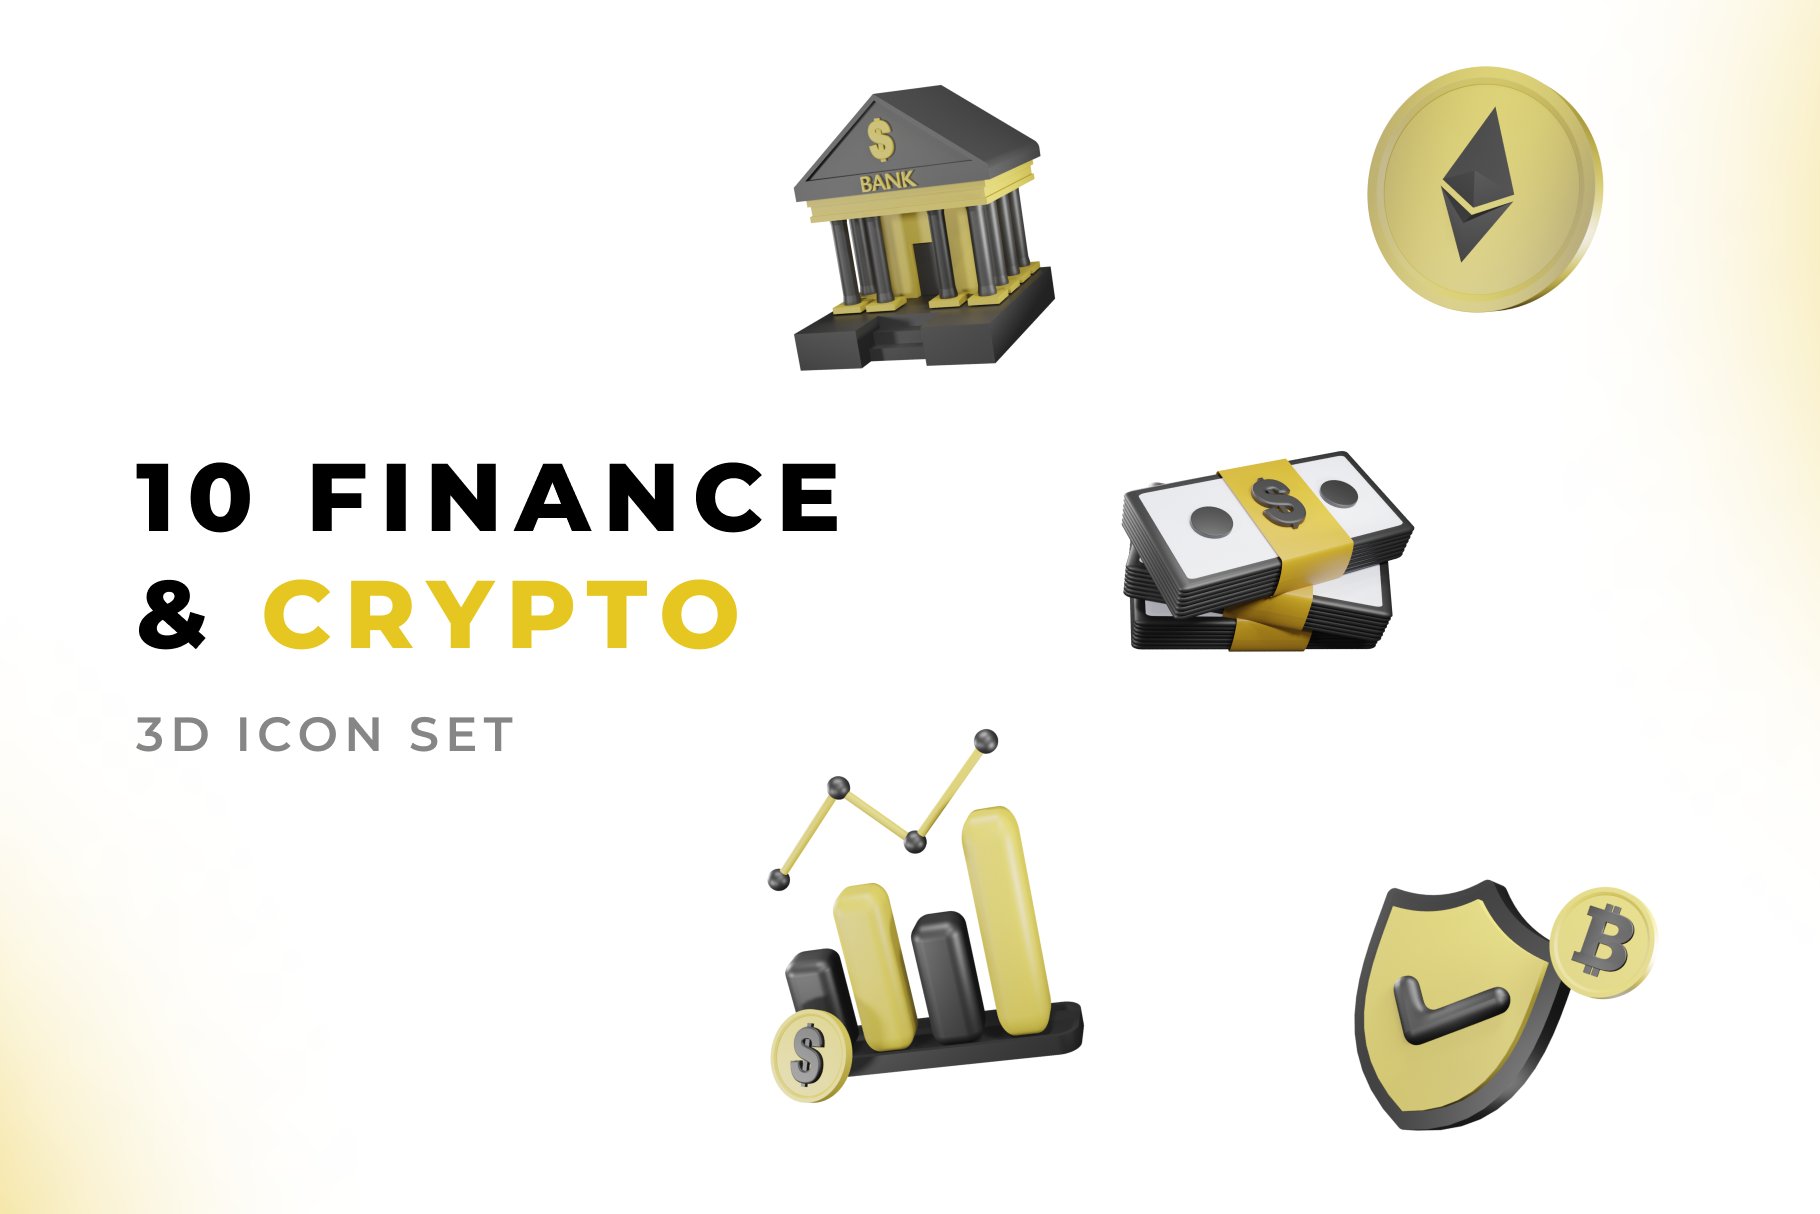 10 Finance & Crypto 3D Icon Set cover image.